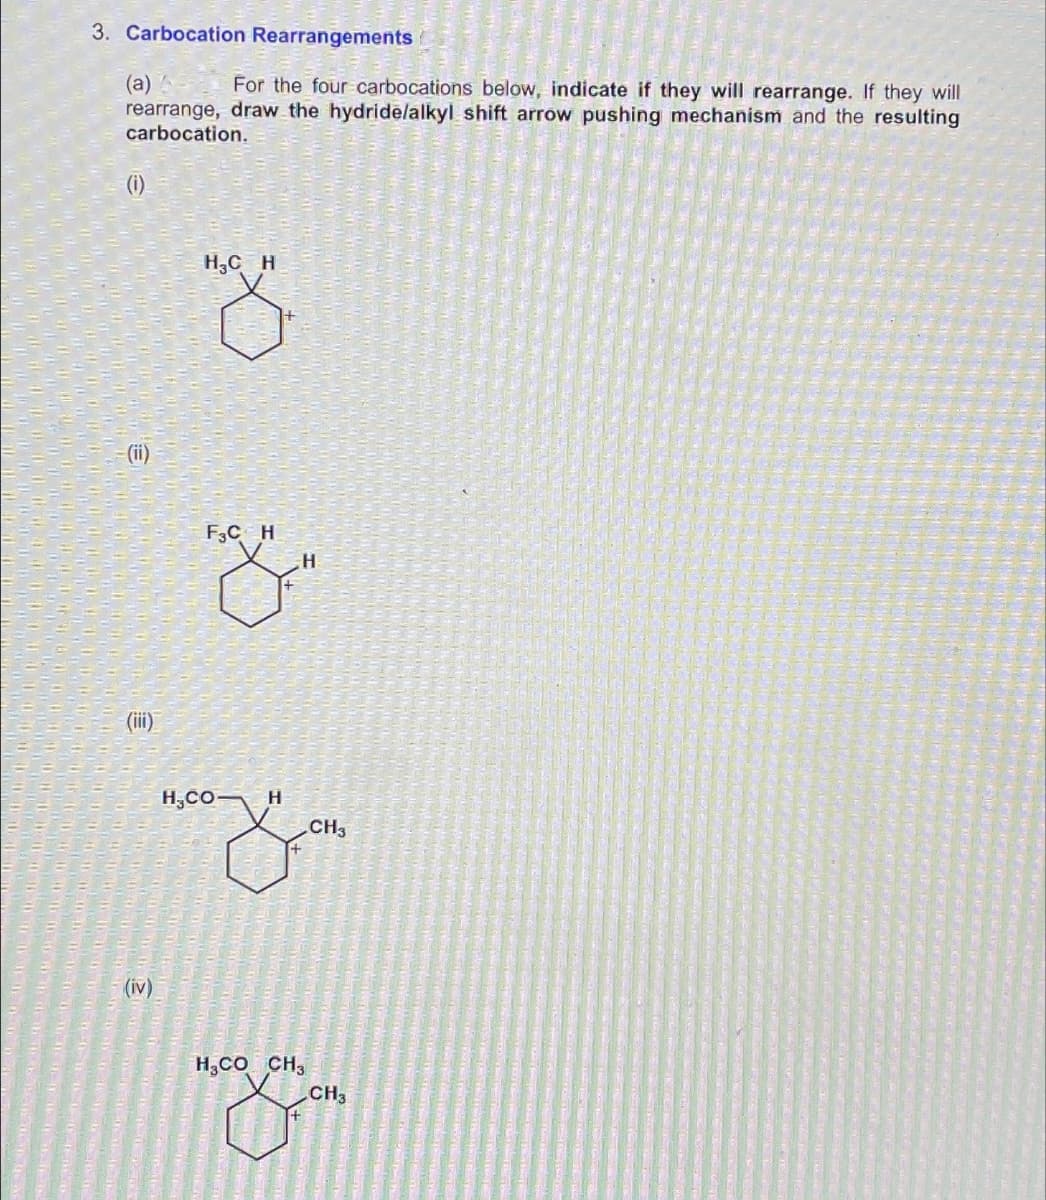 3. Carbocation Rearrangements
(a)
For the four carbocations below, indicate if they will rearrange. If they will
rearrange, draw the hydride/alkyl shift arrow pushing mechanism and the resulting
carbocation.
(i)
(iii)
(iv)
H₂CH
F3C H
HCO-
H
H
H COCH3
CH3
CH3